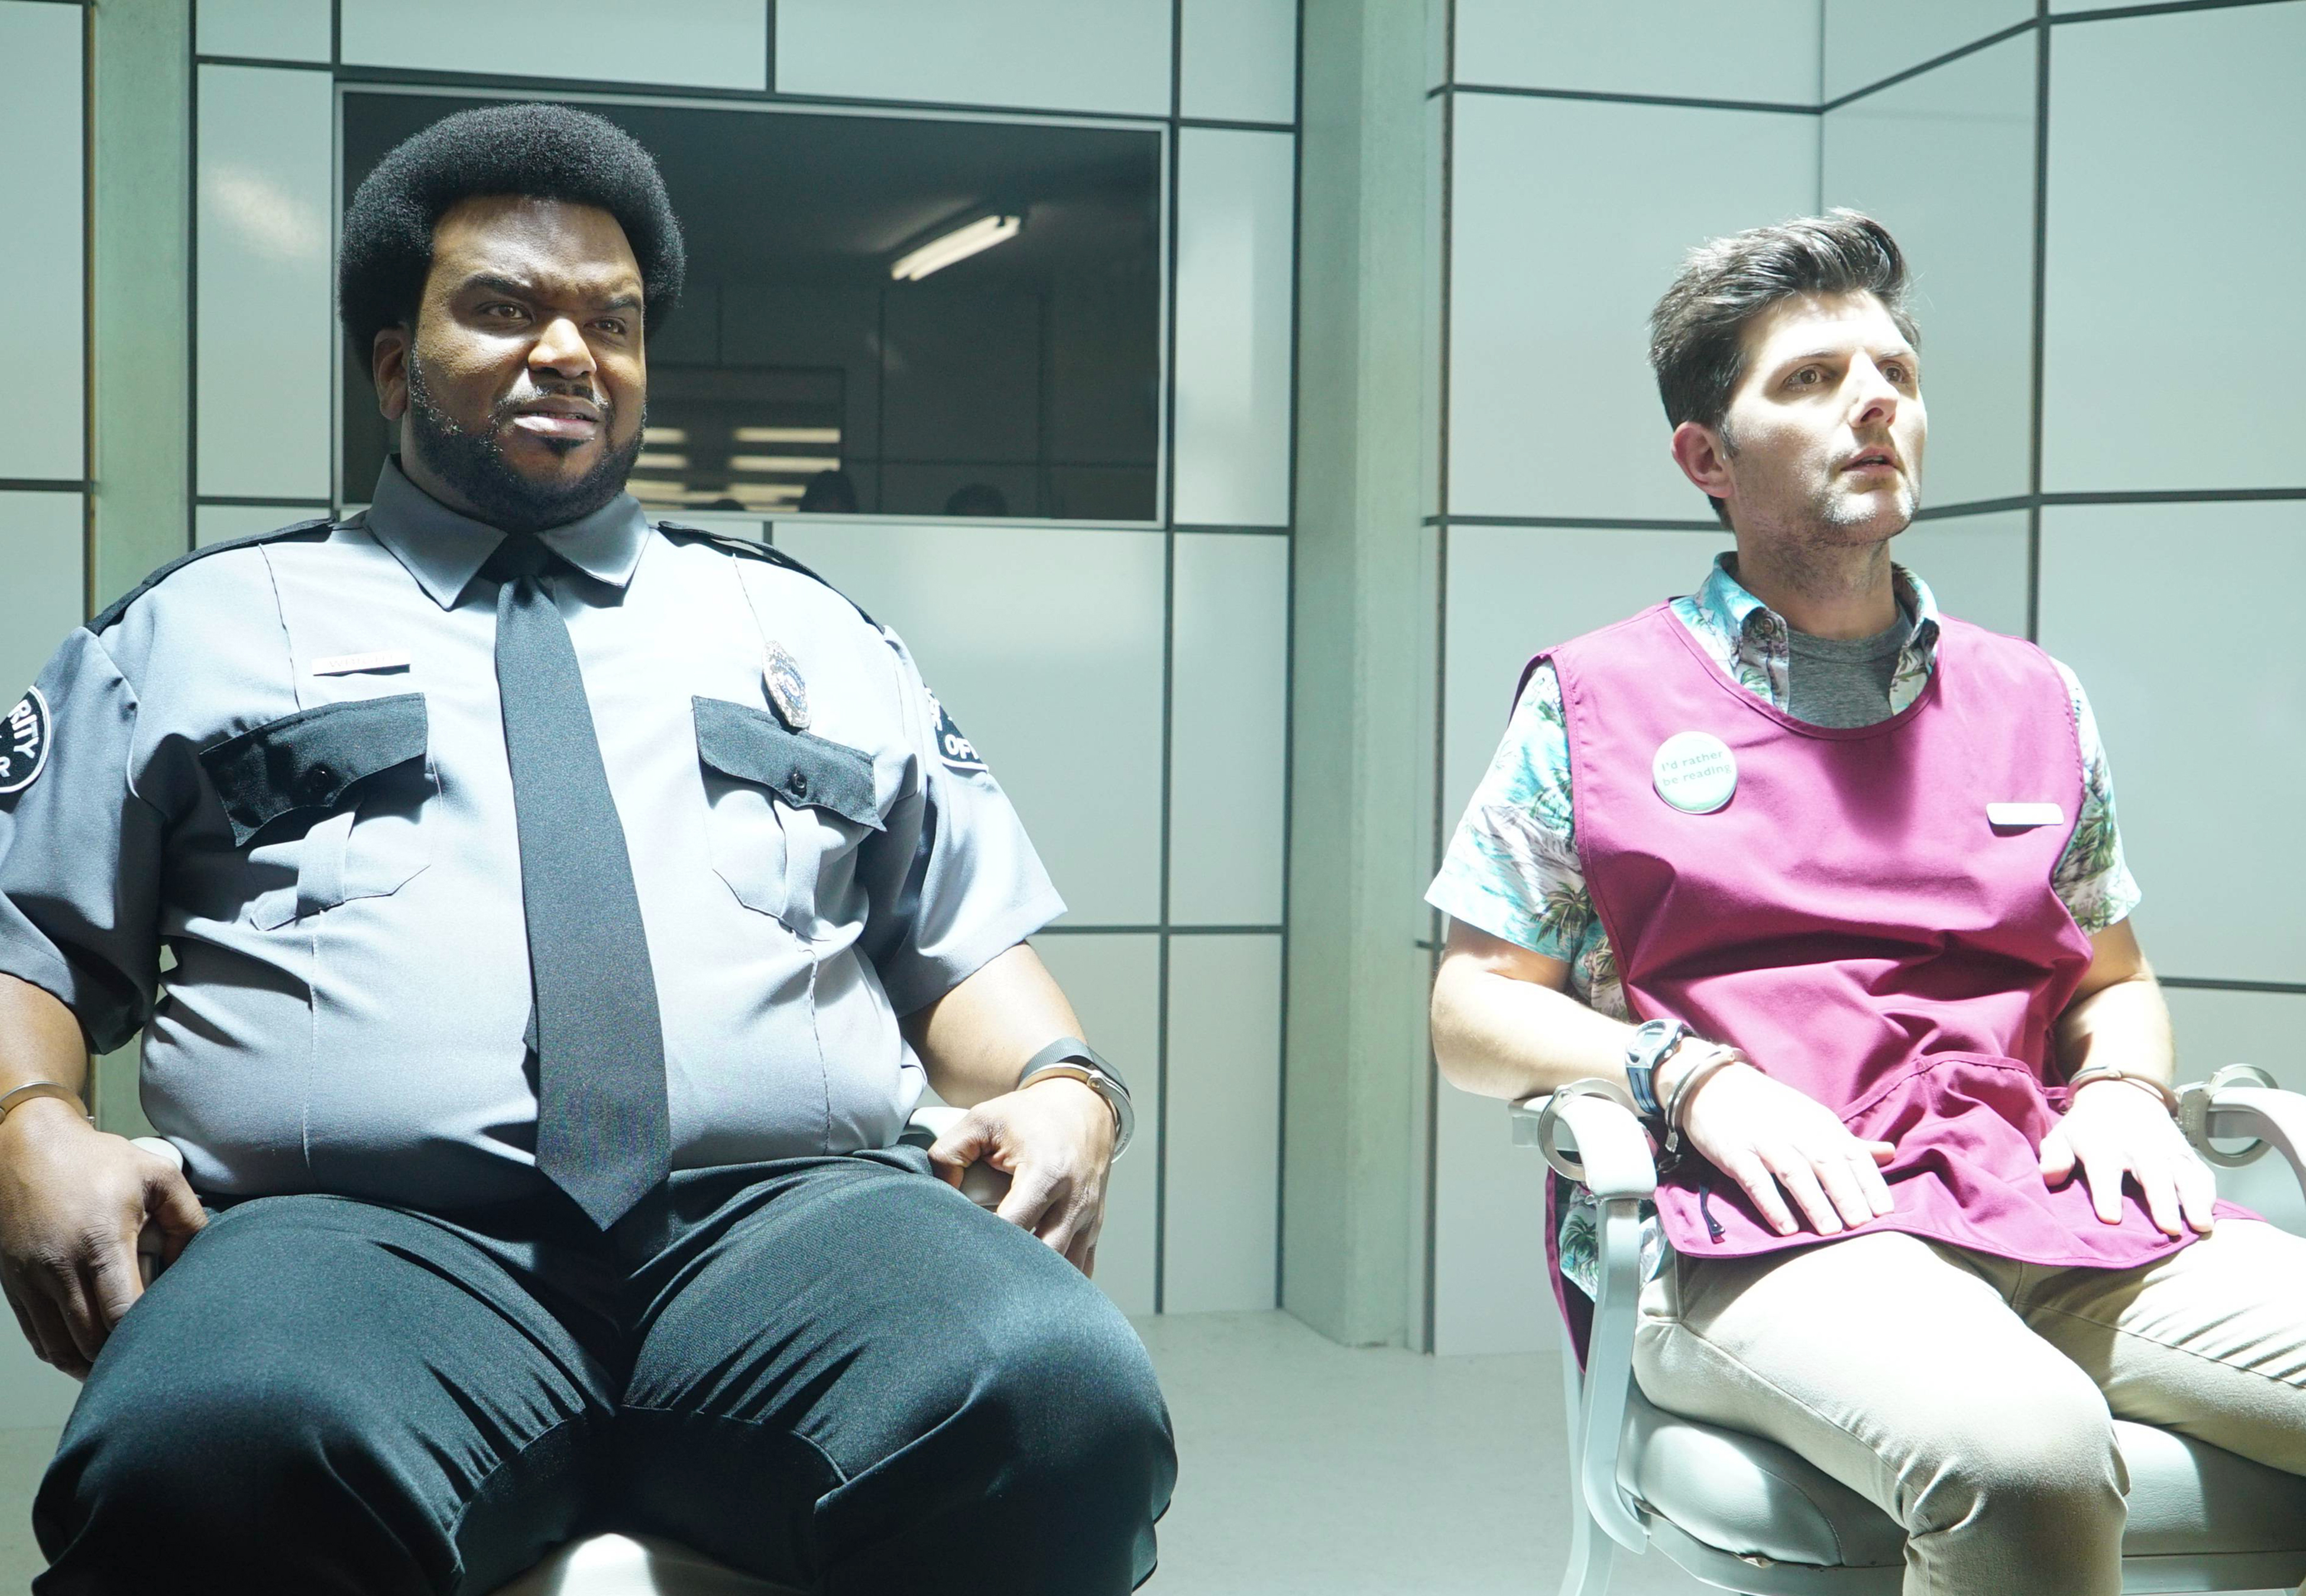 GHOSTED: L-R: Craig Robinson and Adam Scott in GHOSTED premiering this fall on FOX. ©2017 Fox Broadcasting Co. Cr: Kevin Estrada/Fox